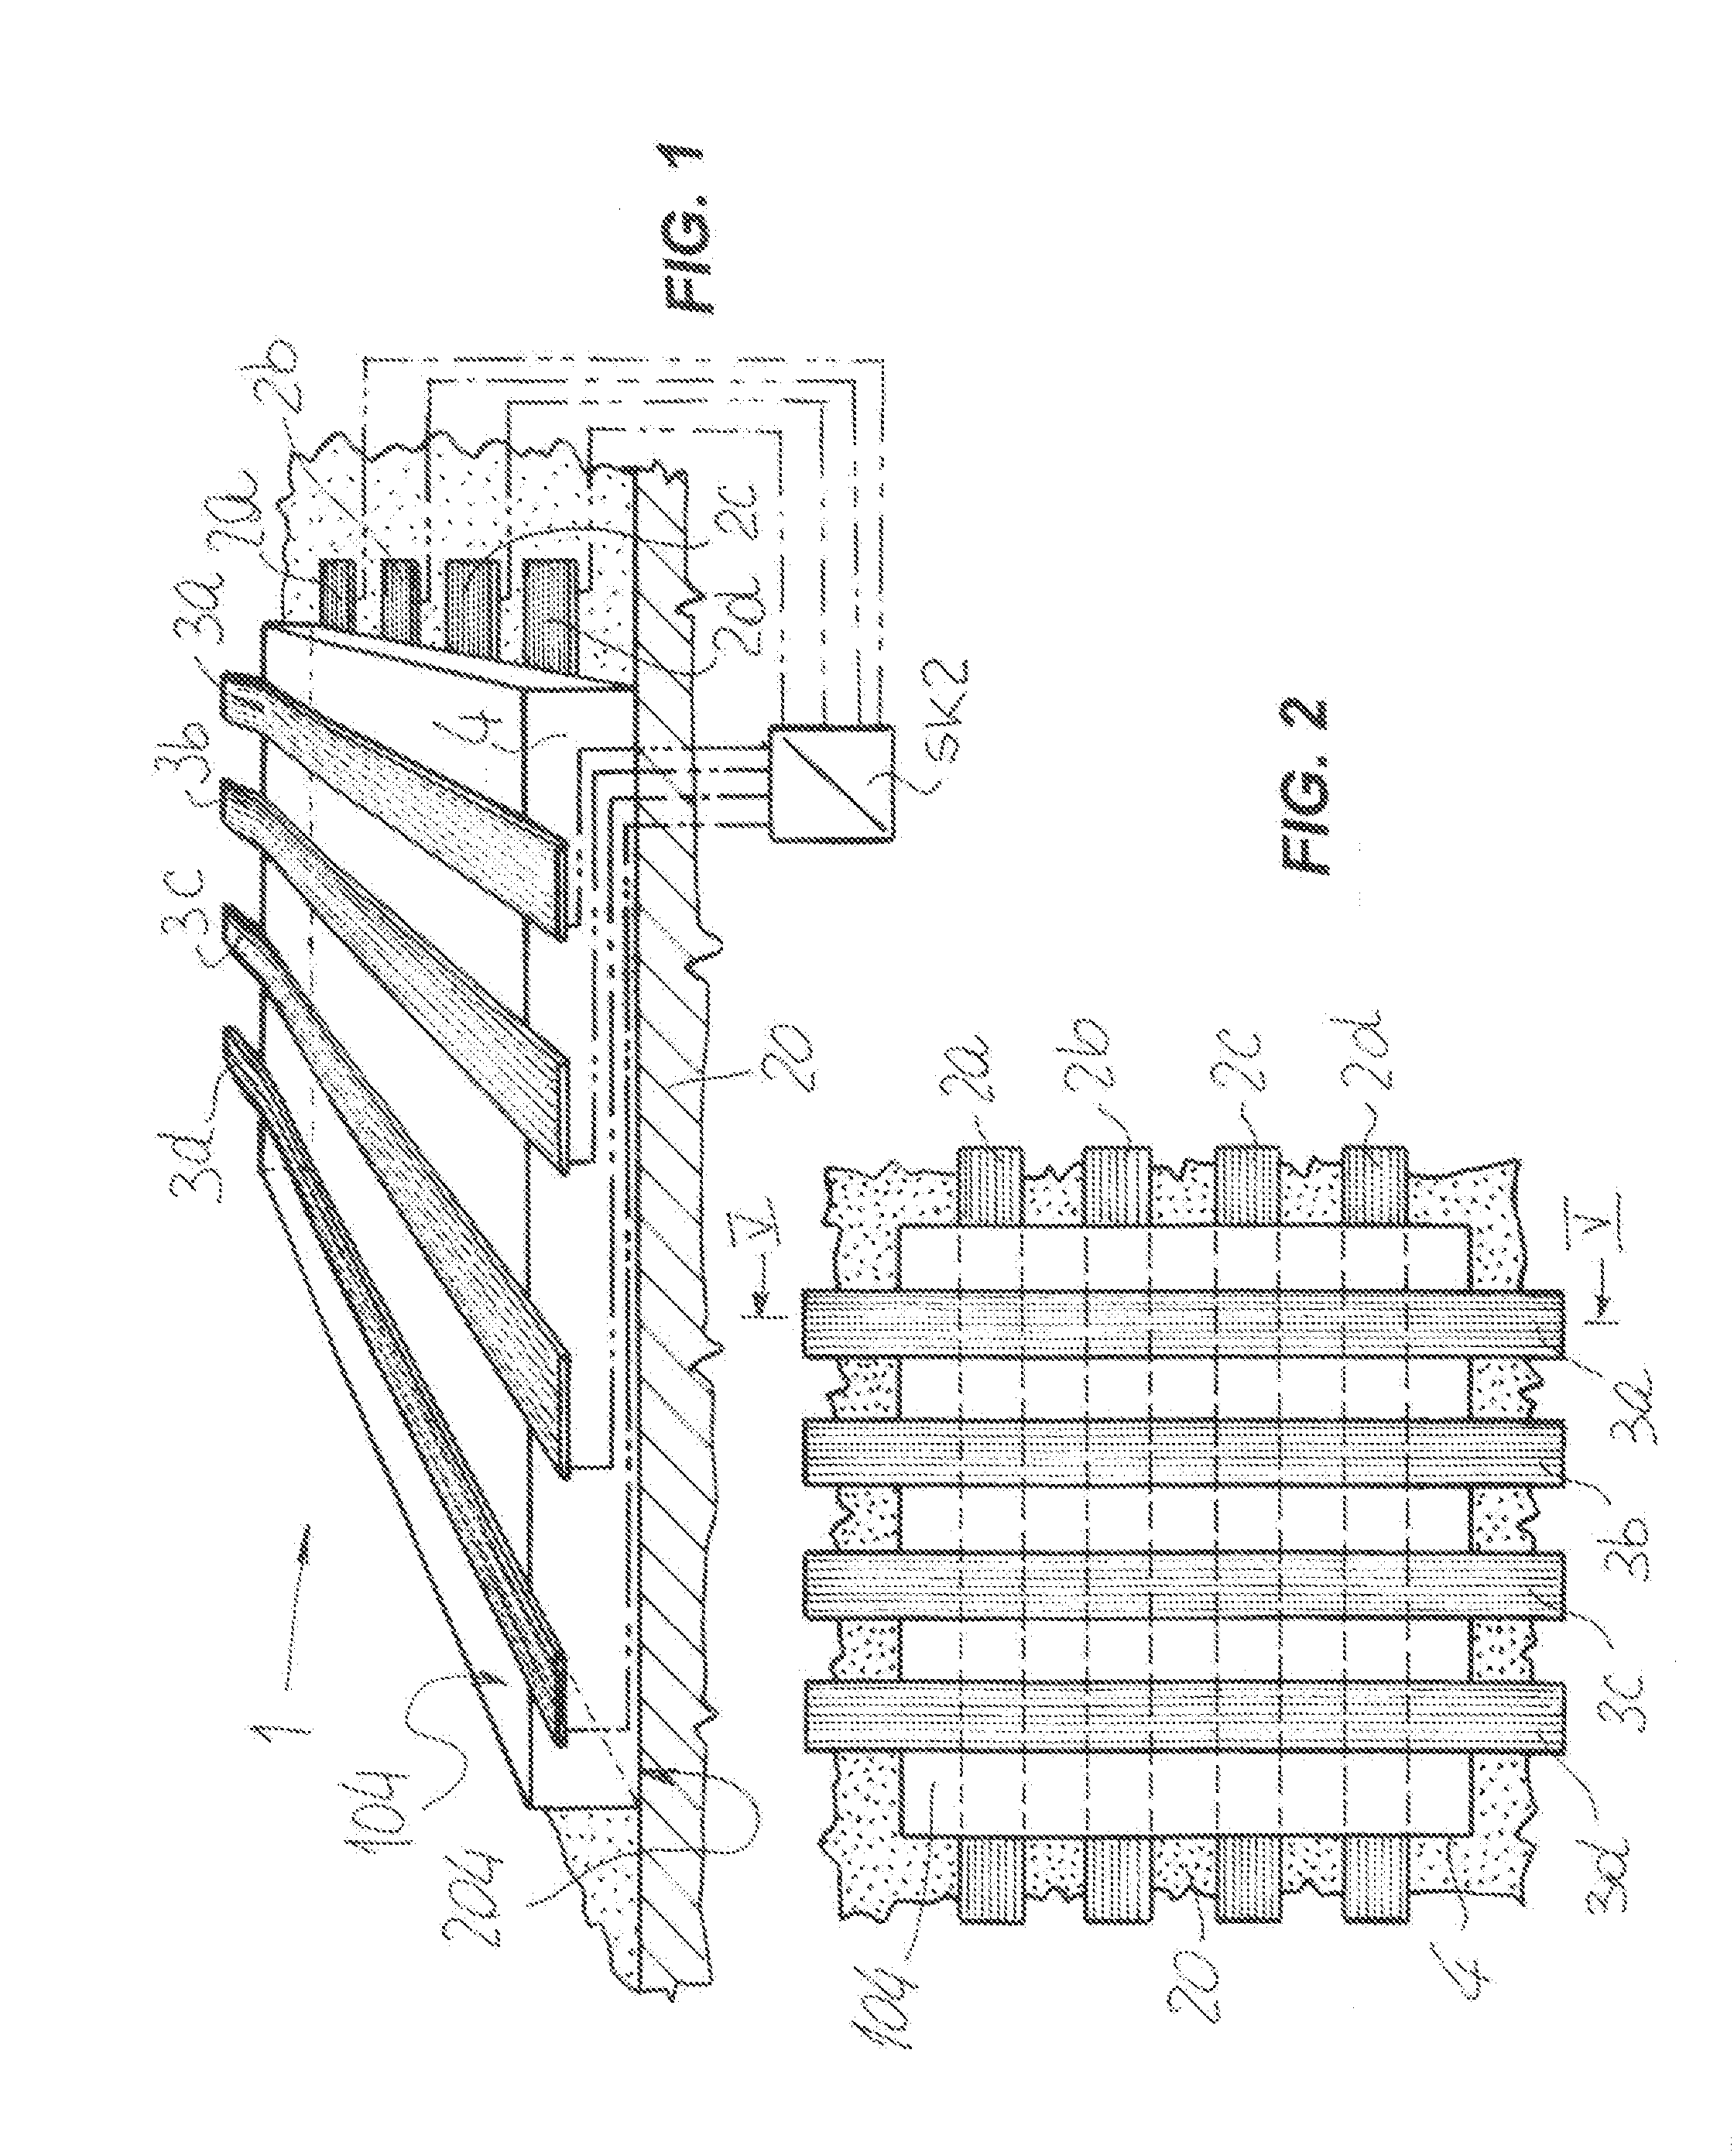 Substrate for a sensitive floor and method for displaying loads on one substrate